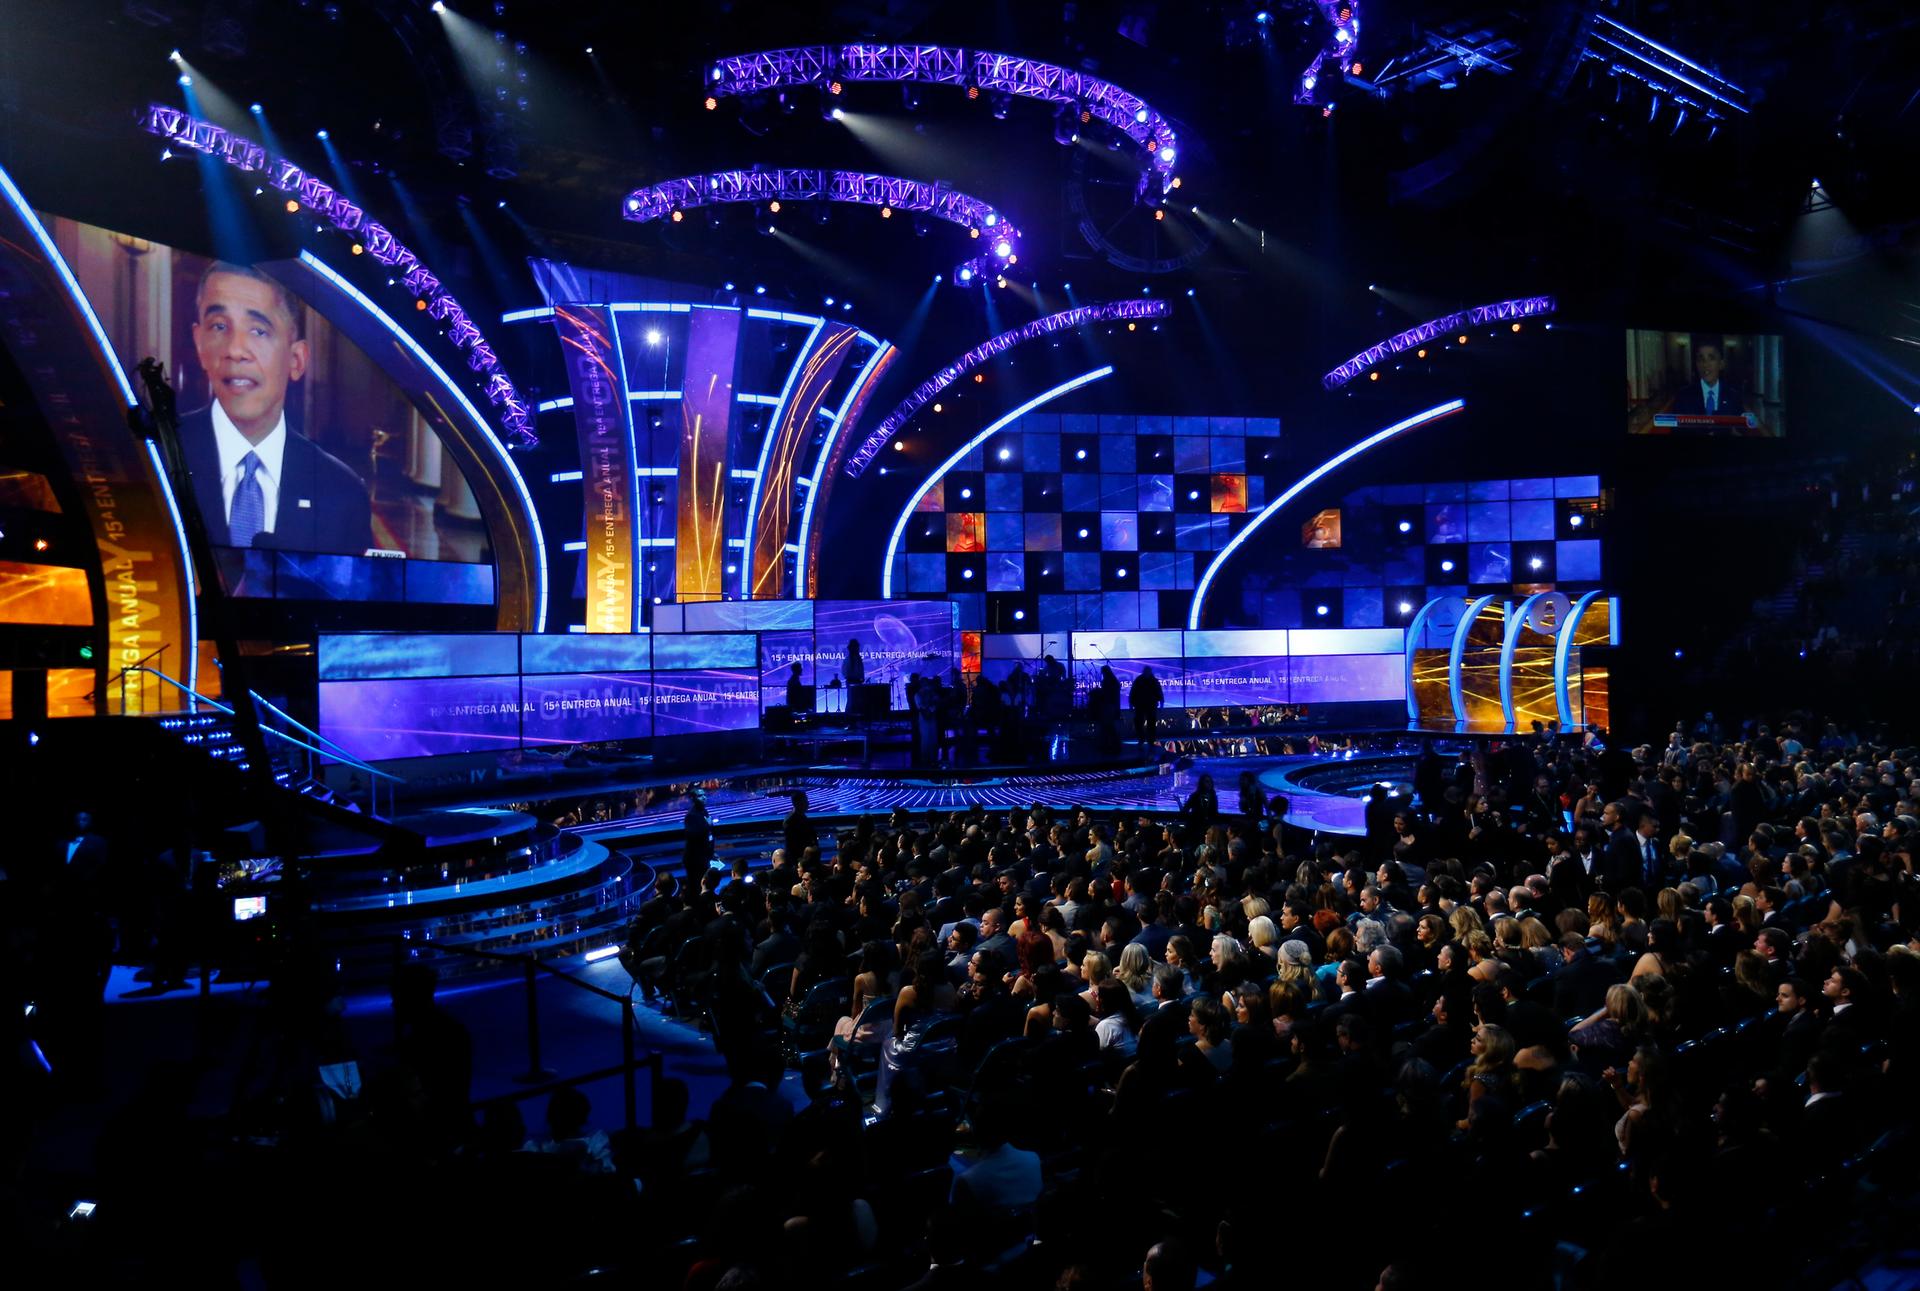 President Barack Obama is shown on a large screen as he delivers his immigration speech from the White House before the start of the 15th Annual Latin Grammy Awards in Las Vegas on November 20, 2014.